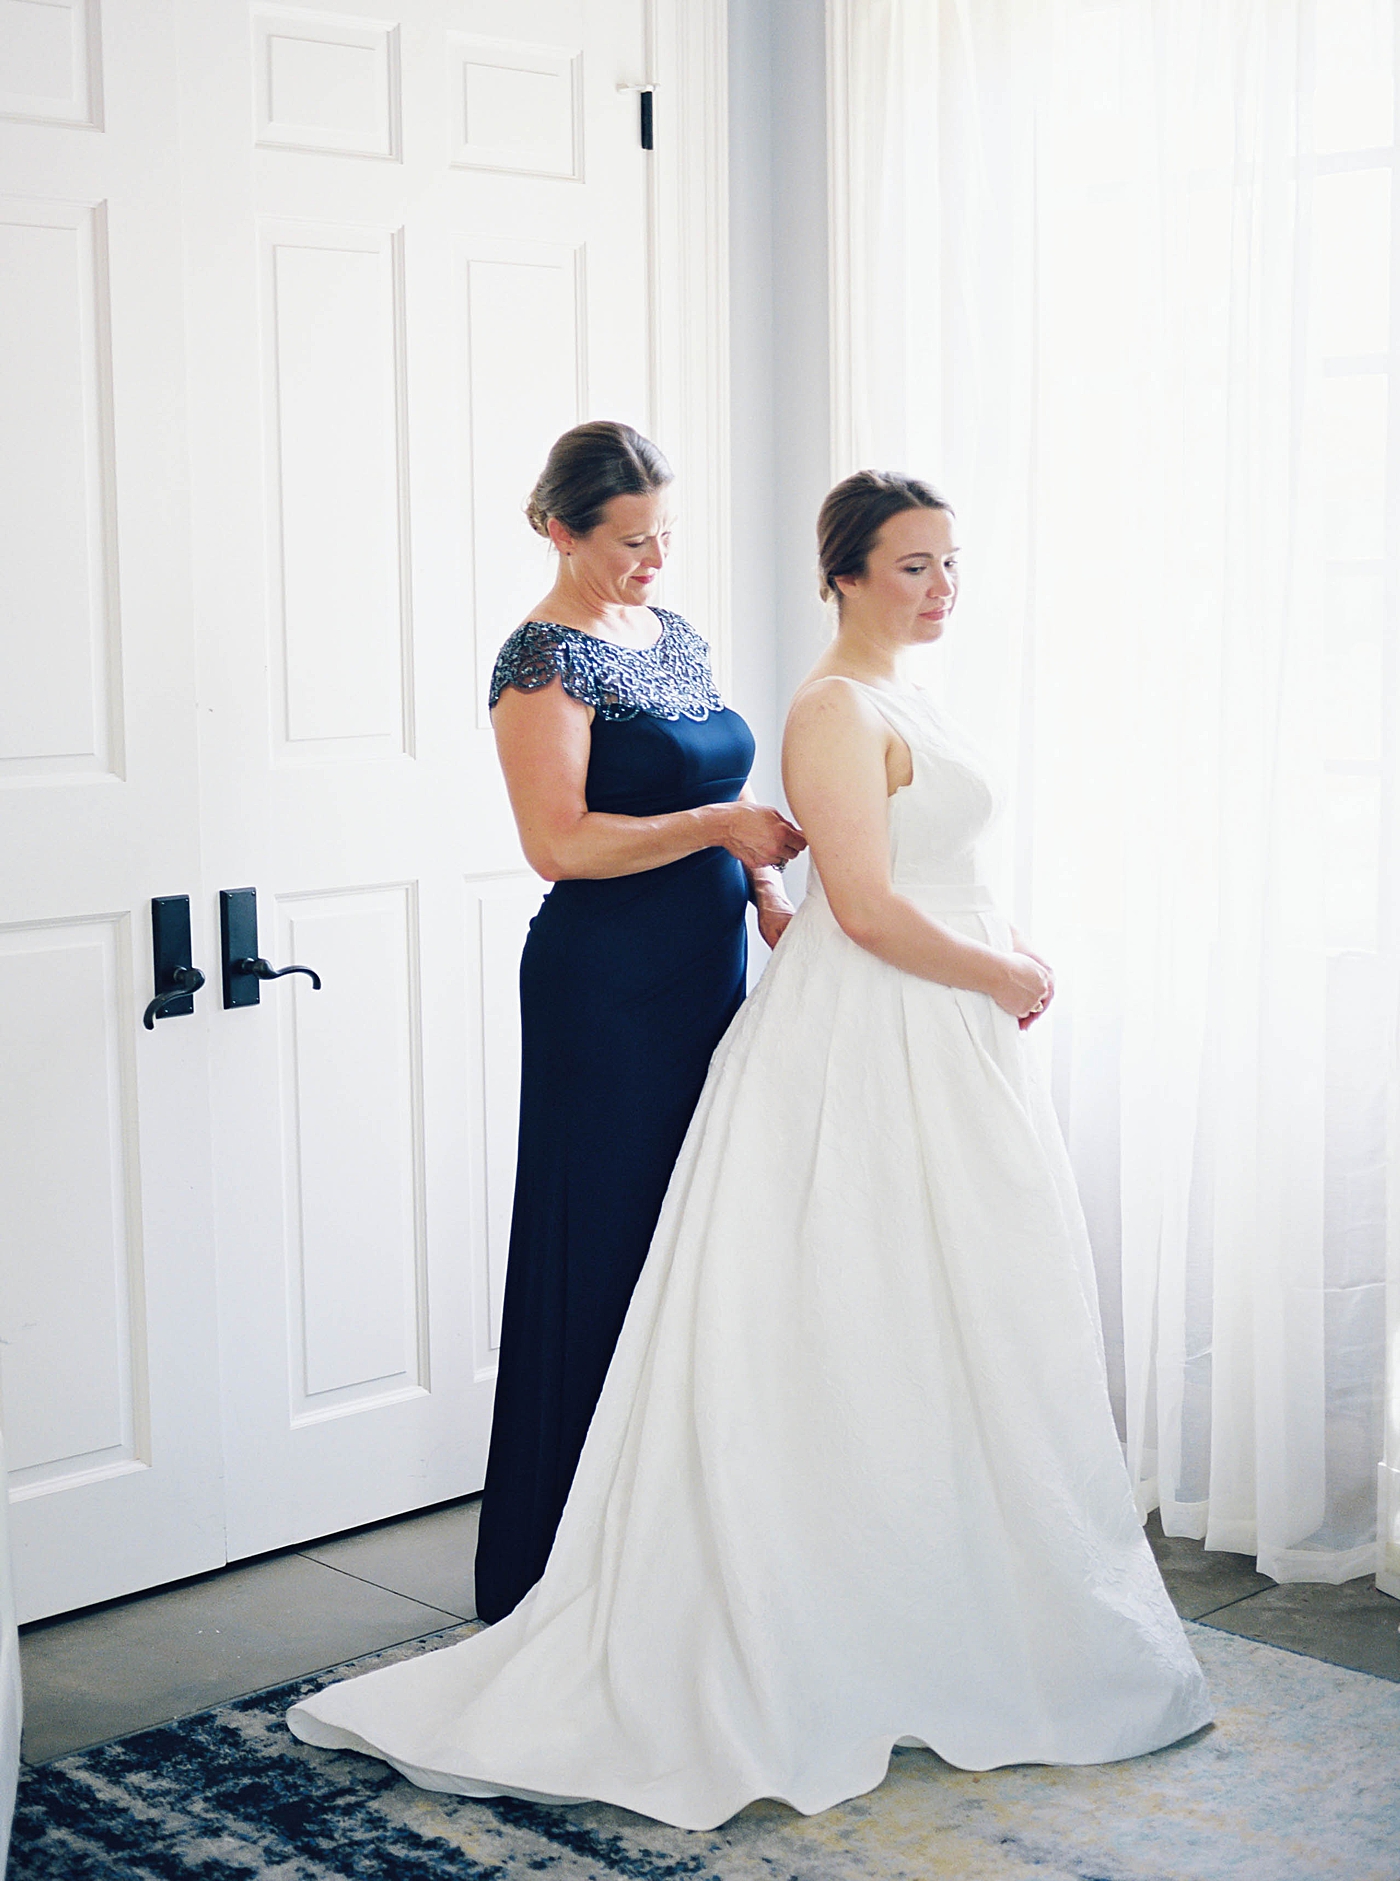 Bride bring helped into her gown | Carters Event Co